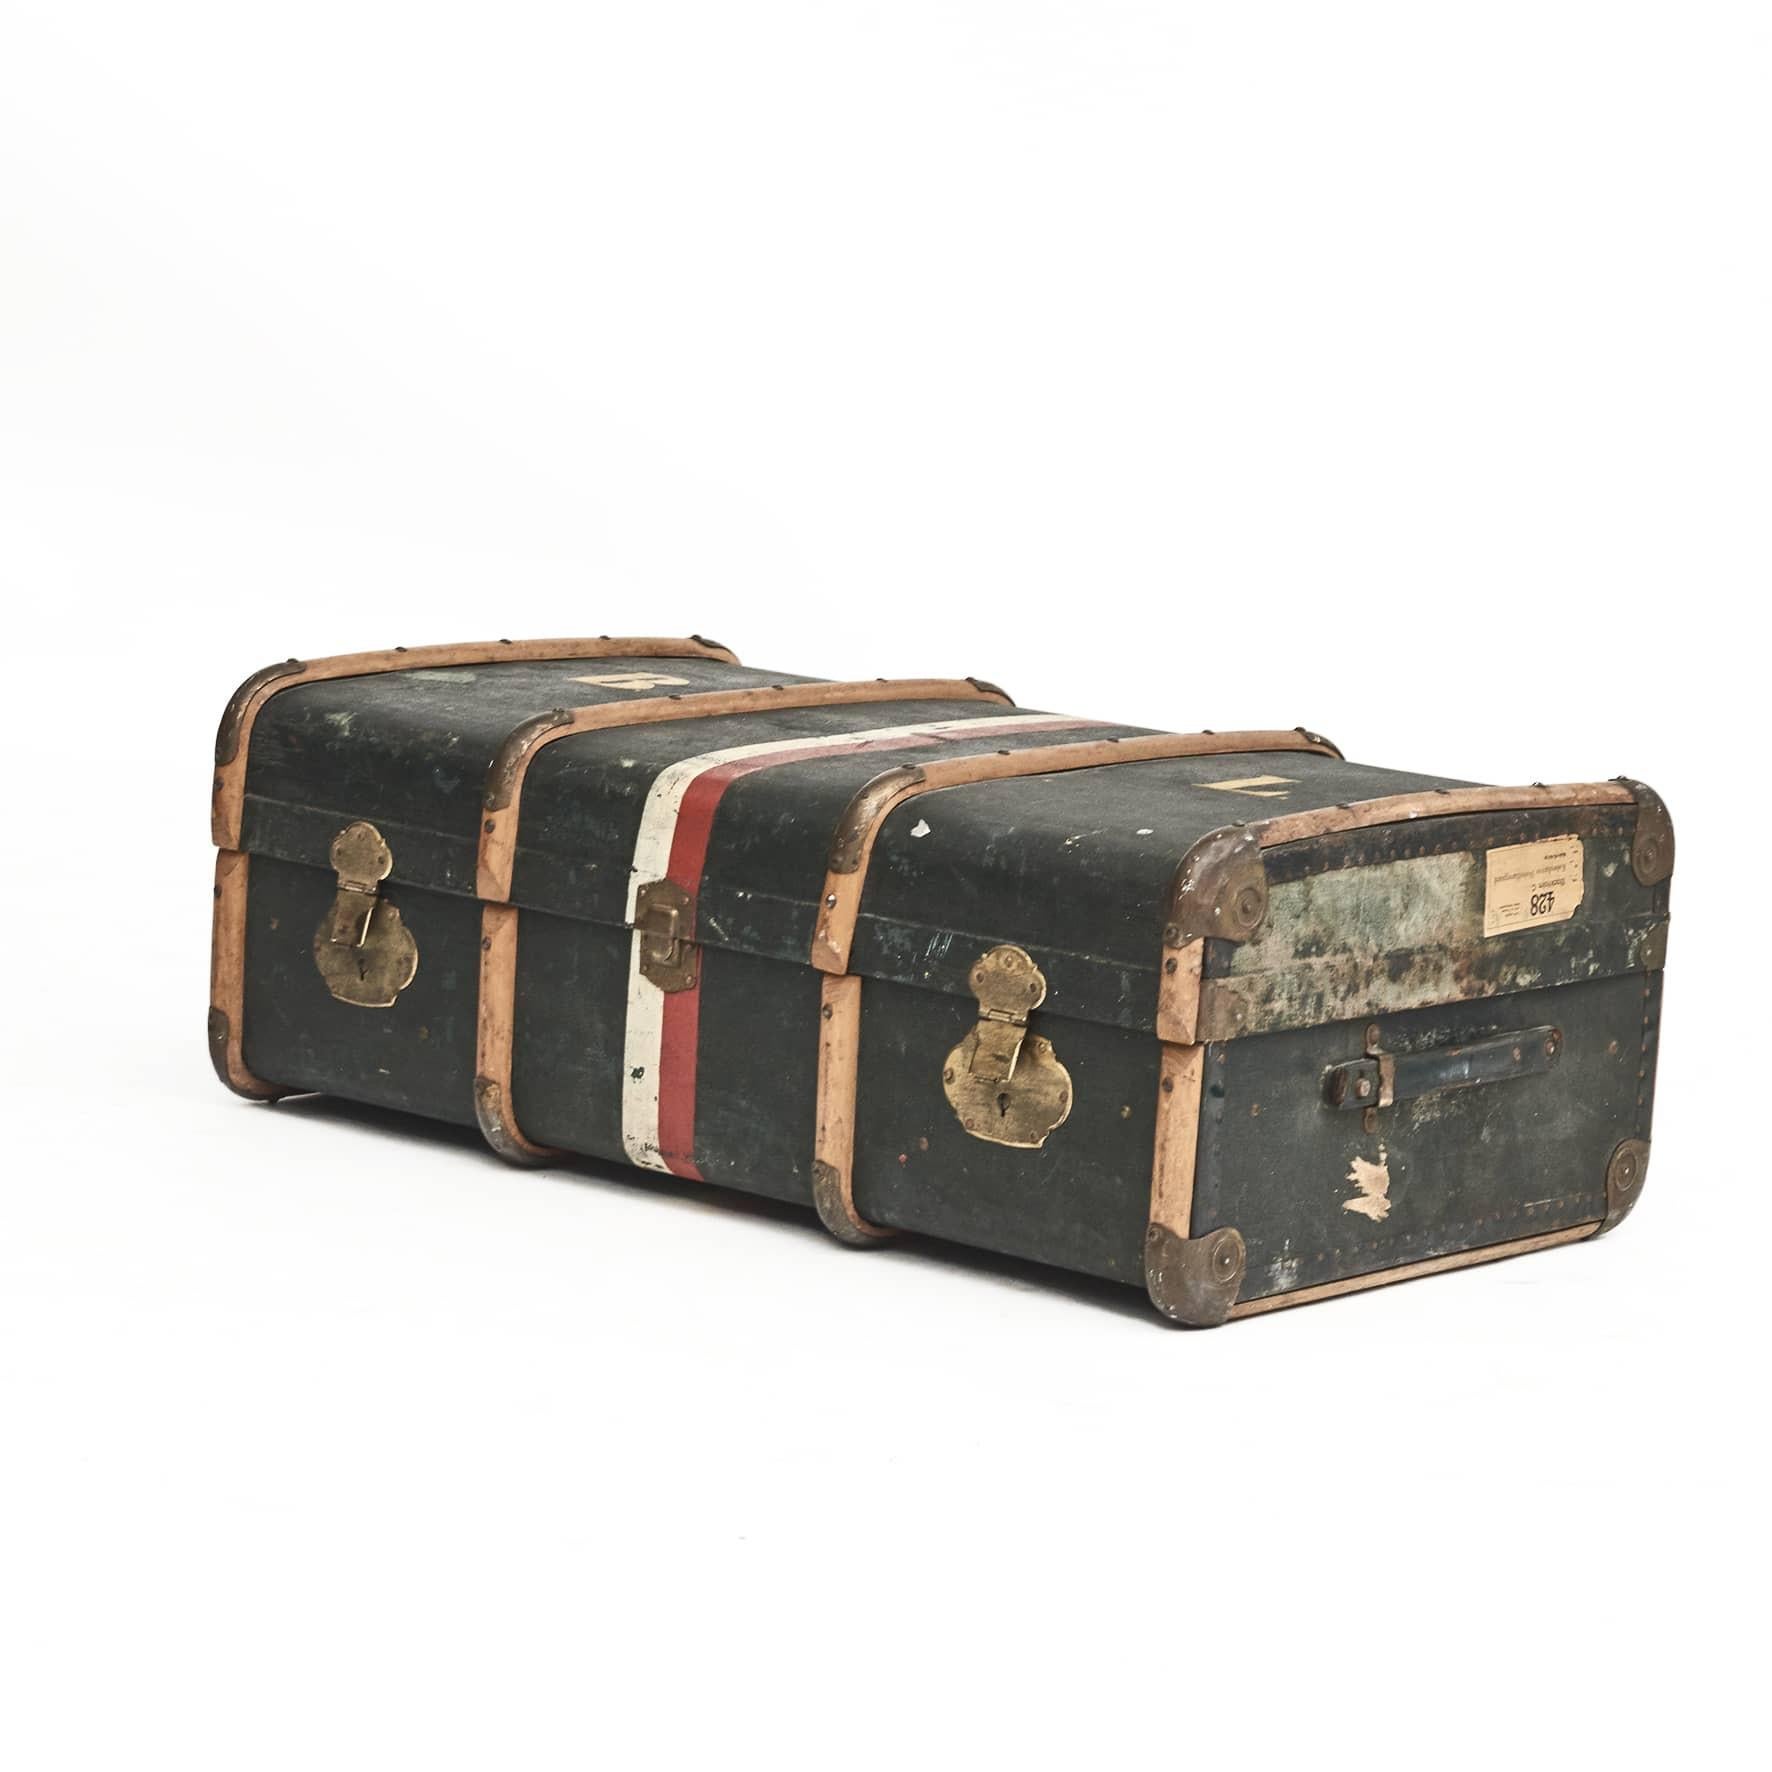 Travelers Trunk inside with canvas approx. 1920.
Wooden band with brass corners with initials B. L. and inside covered with fabric.
Front with brass fittings.

Made in very charming and decorative condition.